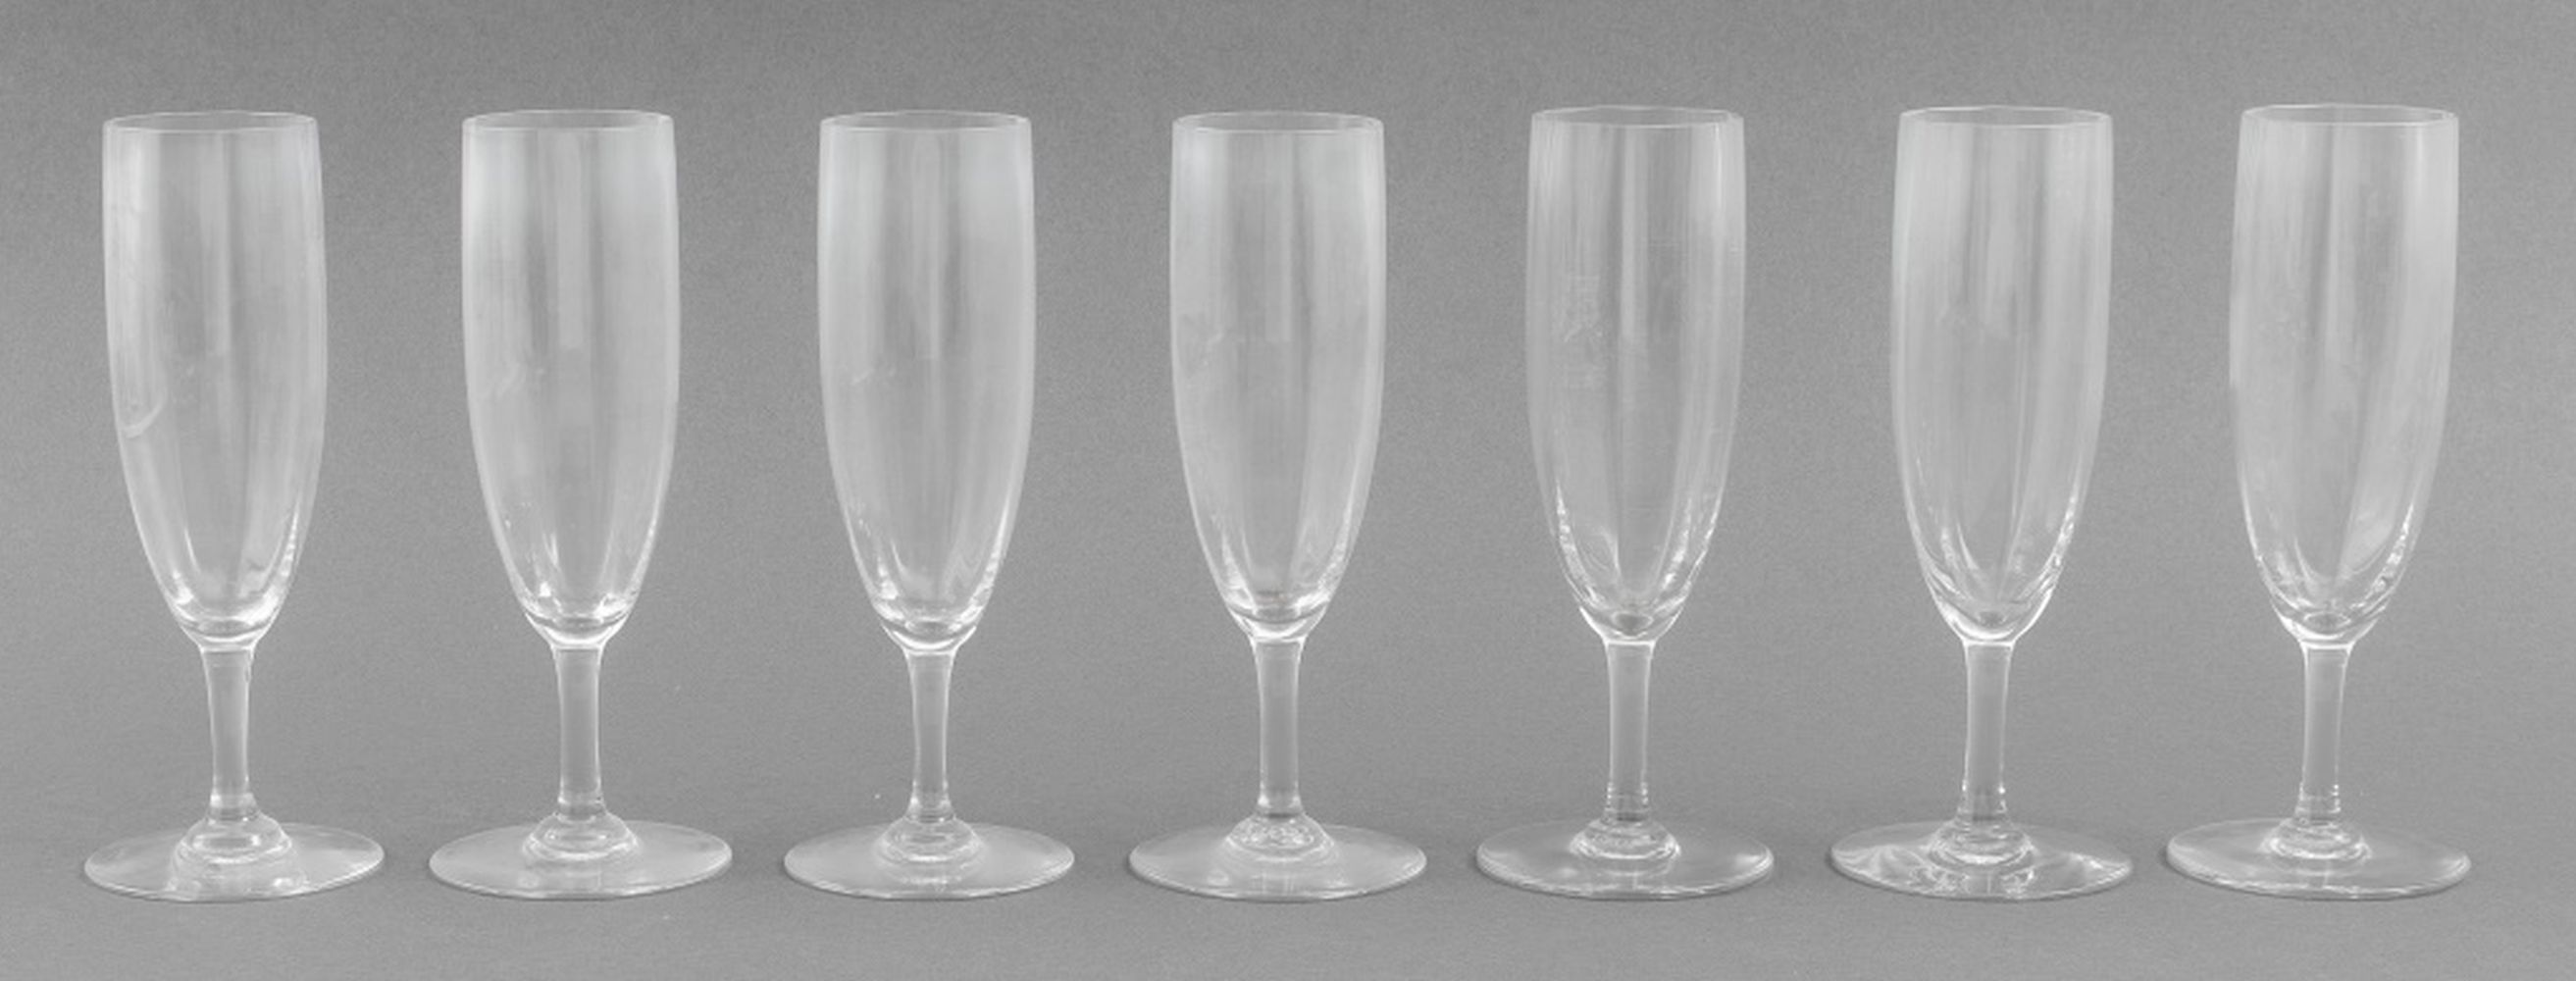 BACCARAT CRYSTAL CHAMPAGNE FLUTES  2bbc9a